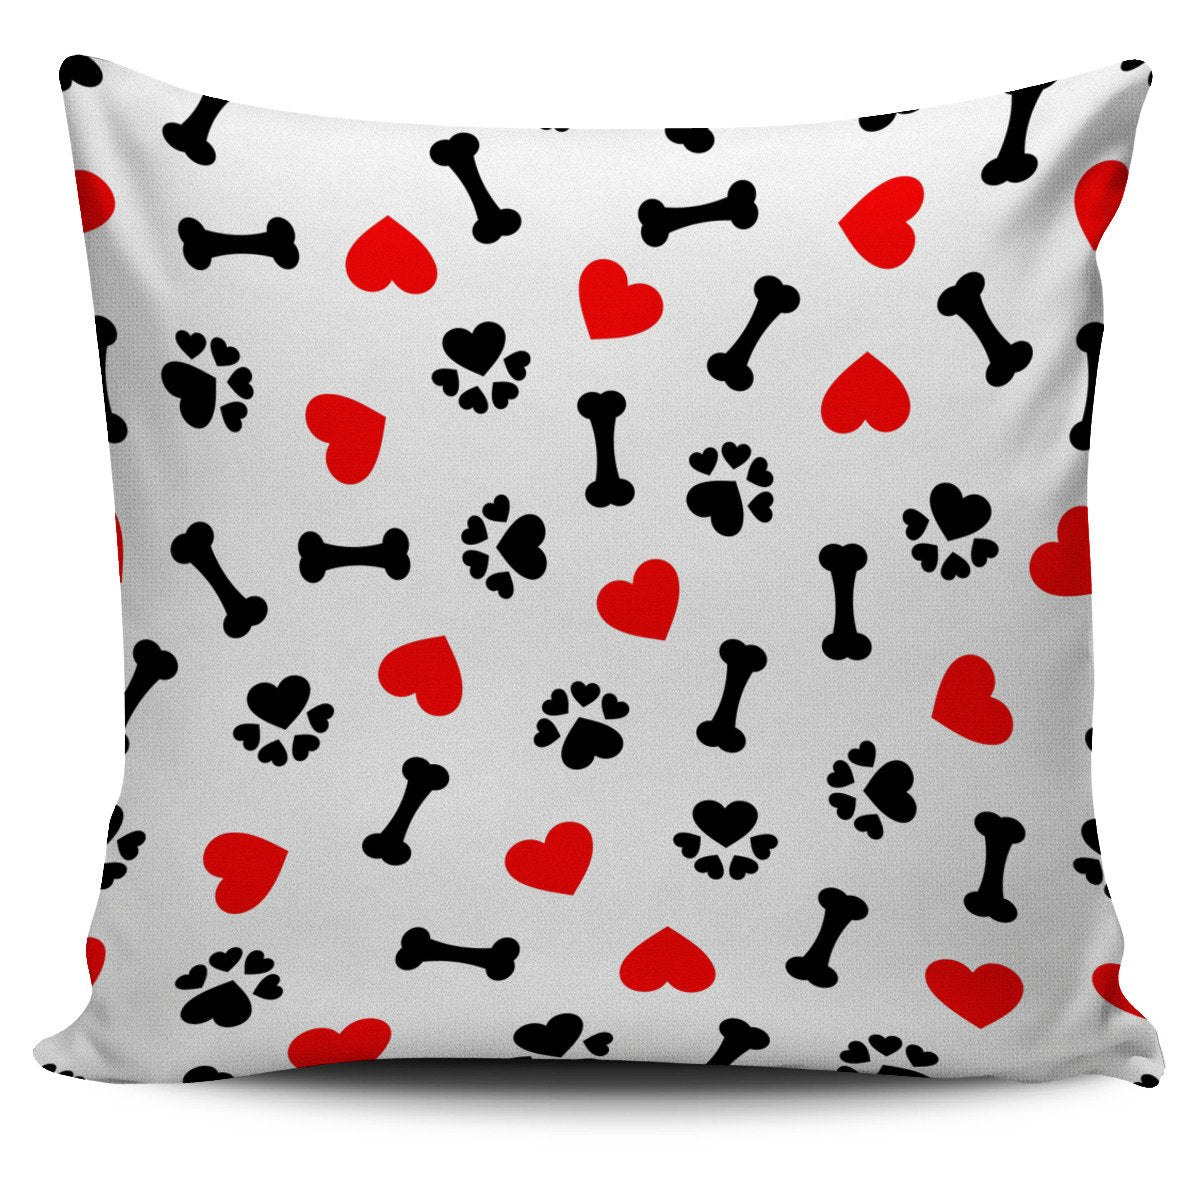 Dog Love Pillow Cover-DogsTailCircle